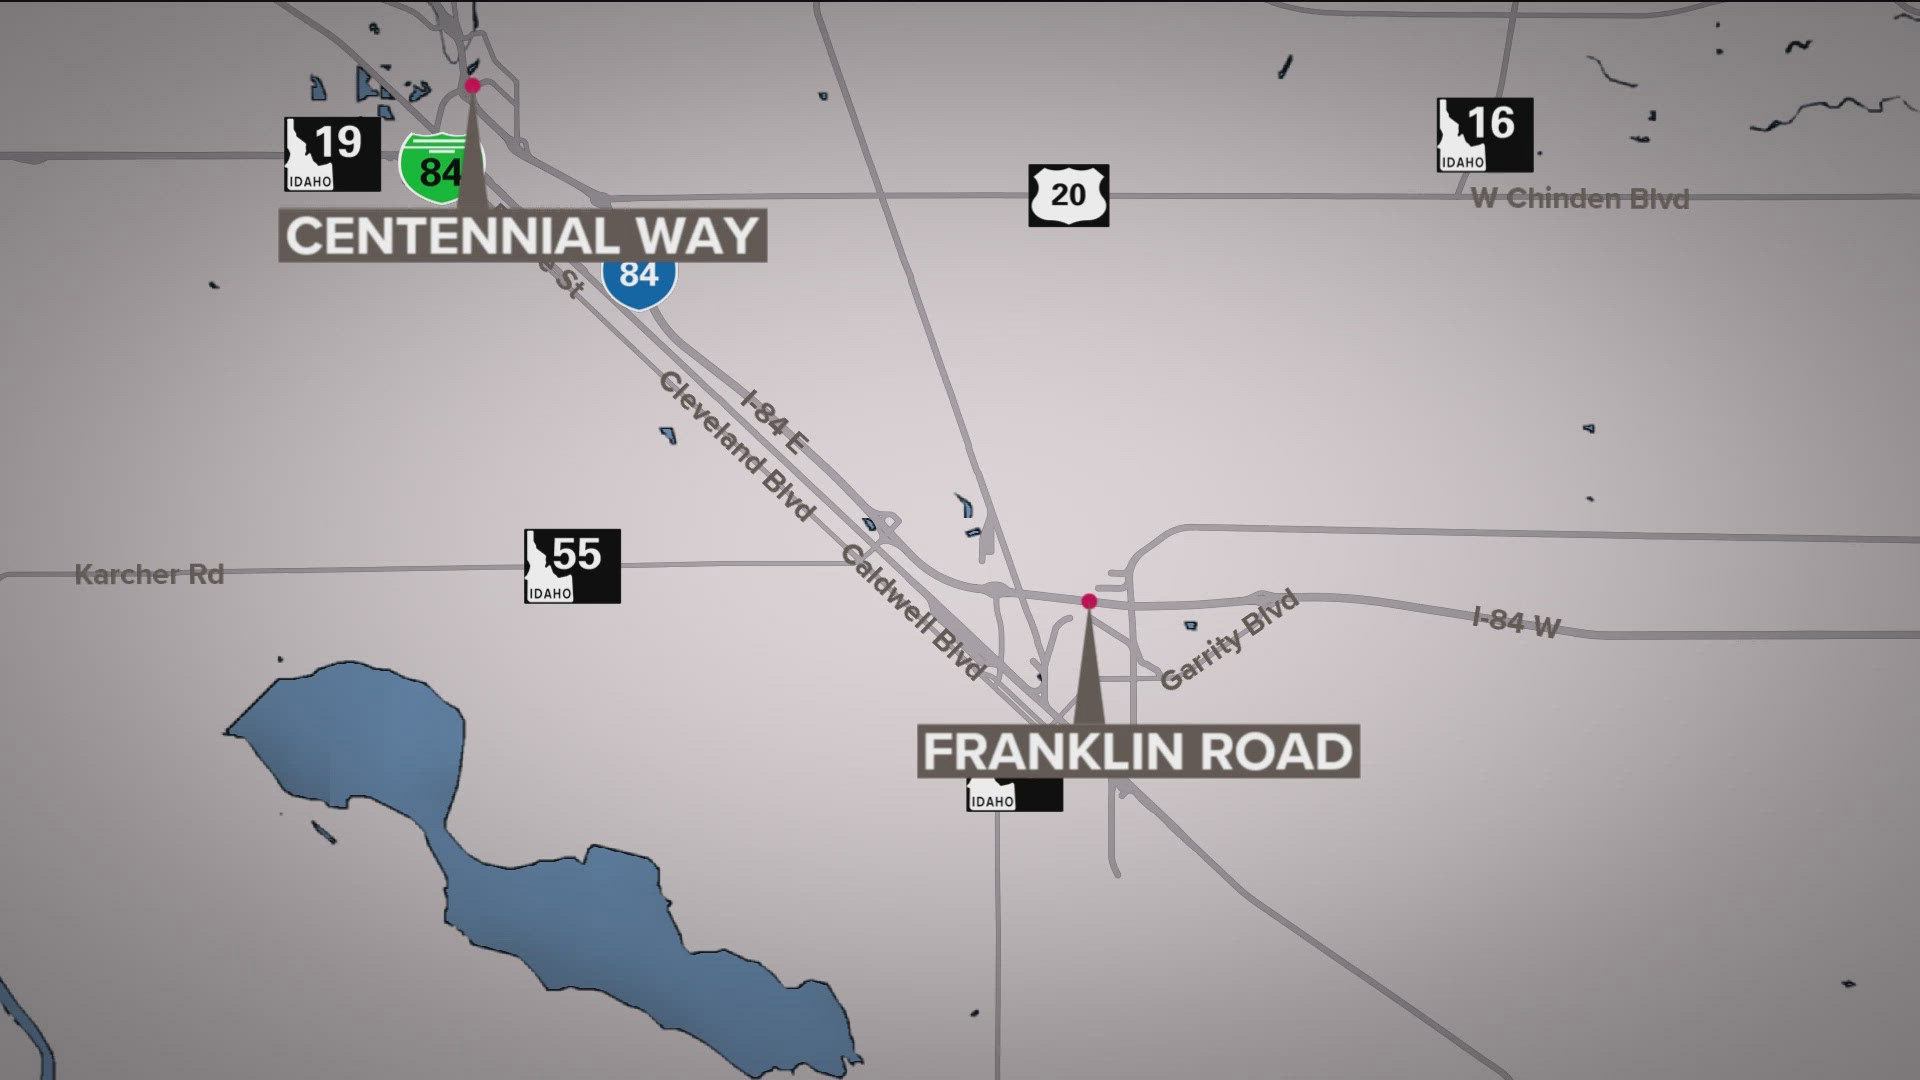 ITD stated that over the next two weeks, it will shift traffic to only use eastbound I-84 lanes between Centennial Way and Franklin Road interchanges.